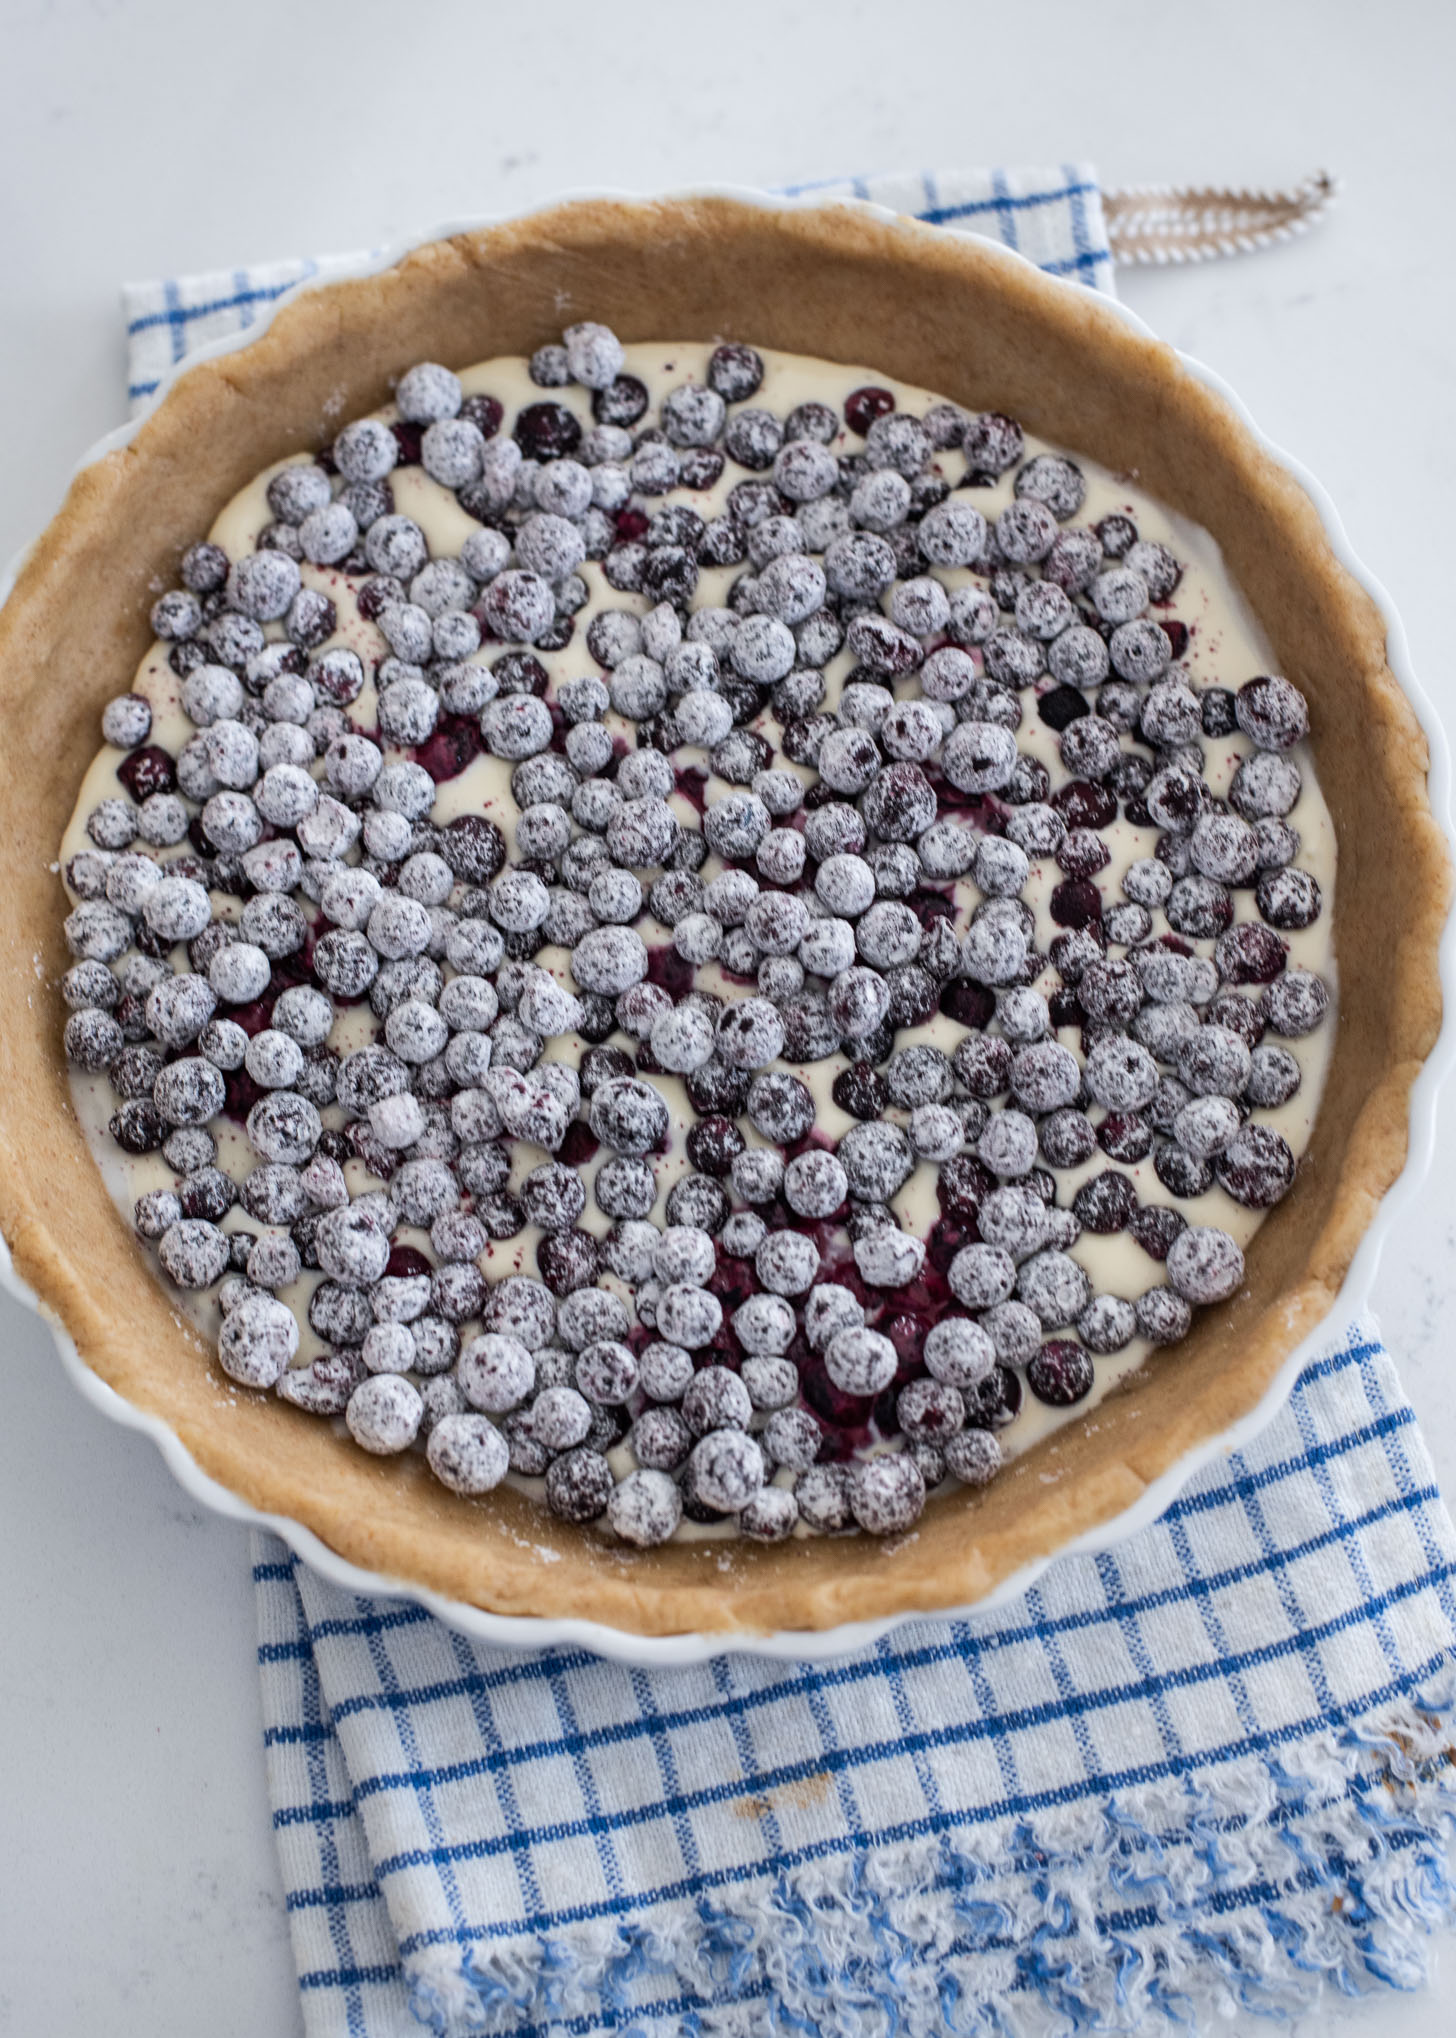 Blueberries coated with flour are placed on a cream filling in a pie crust,